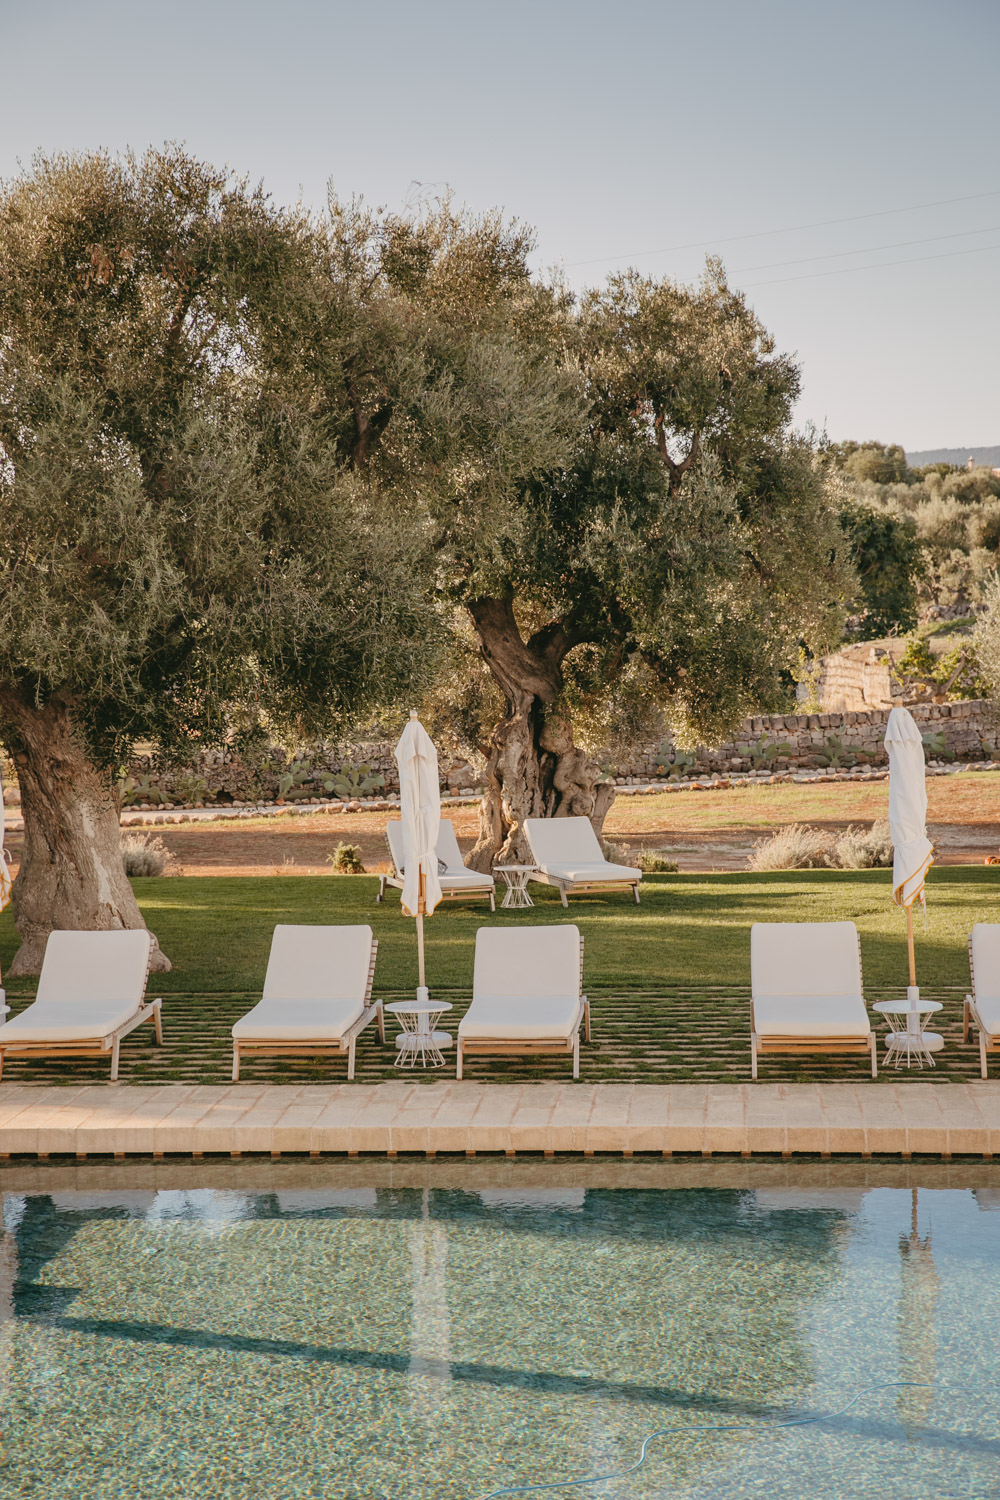 sunchairs aligned by the pool of masseria calderisi